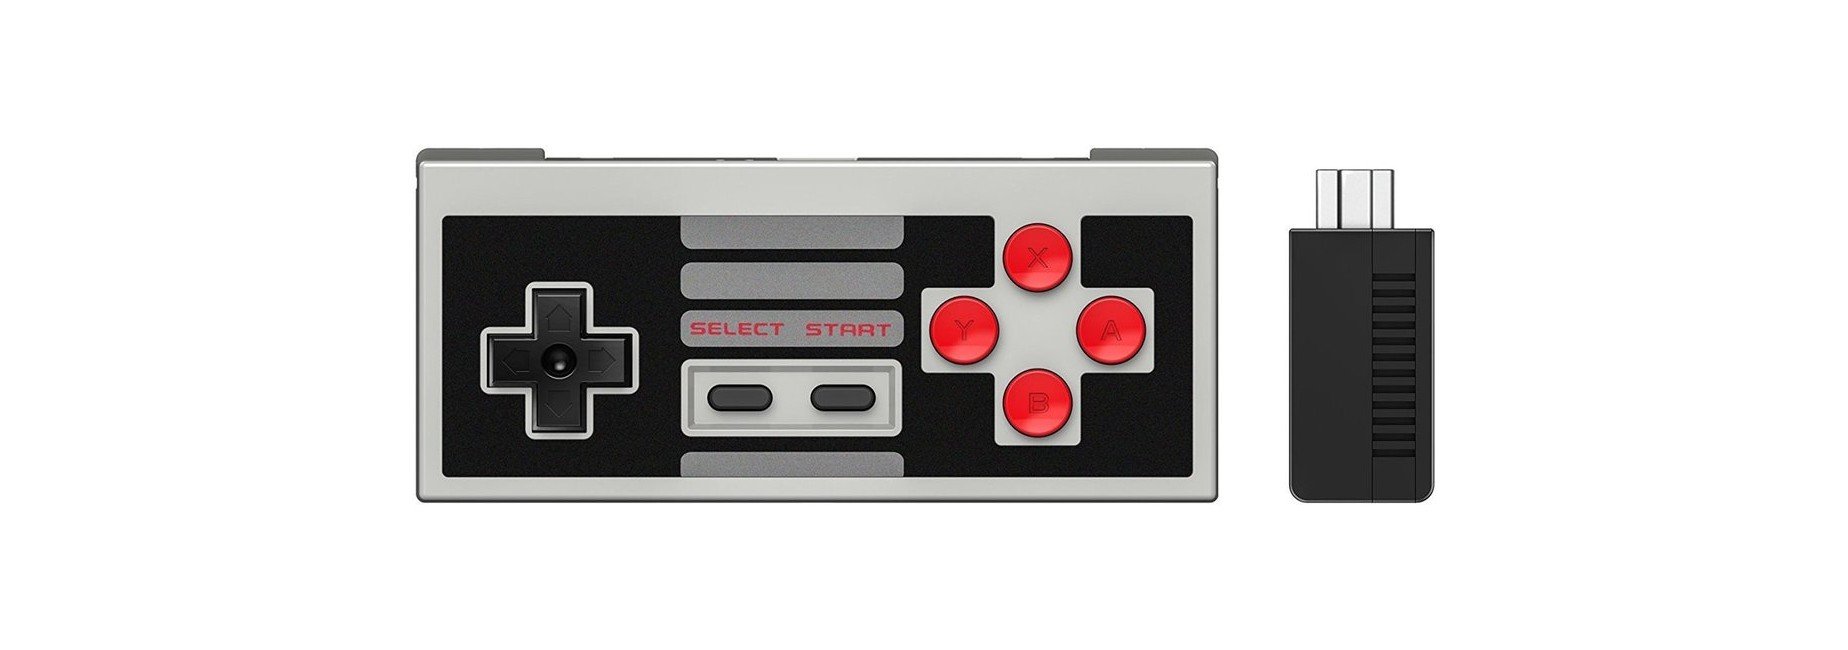 noget controller Gutter Køb 8Bitdo NES30 Classic Retro Controller with Wireless Bluetooth Retro  Receiver for NES Mini